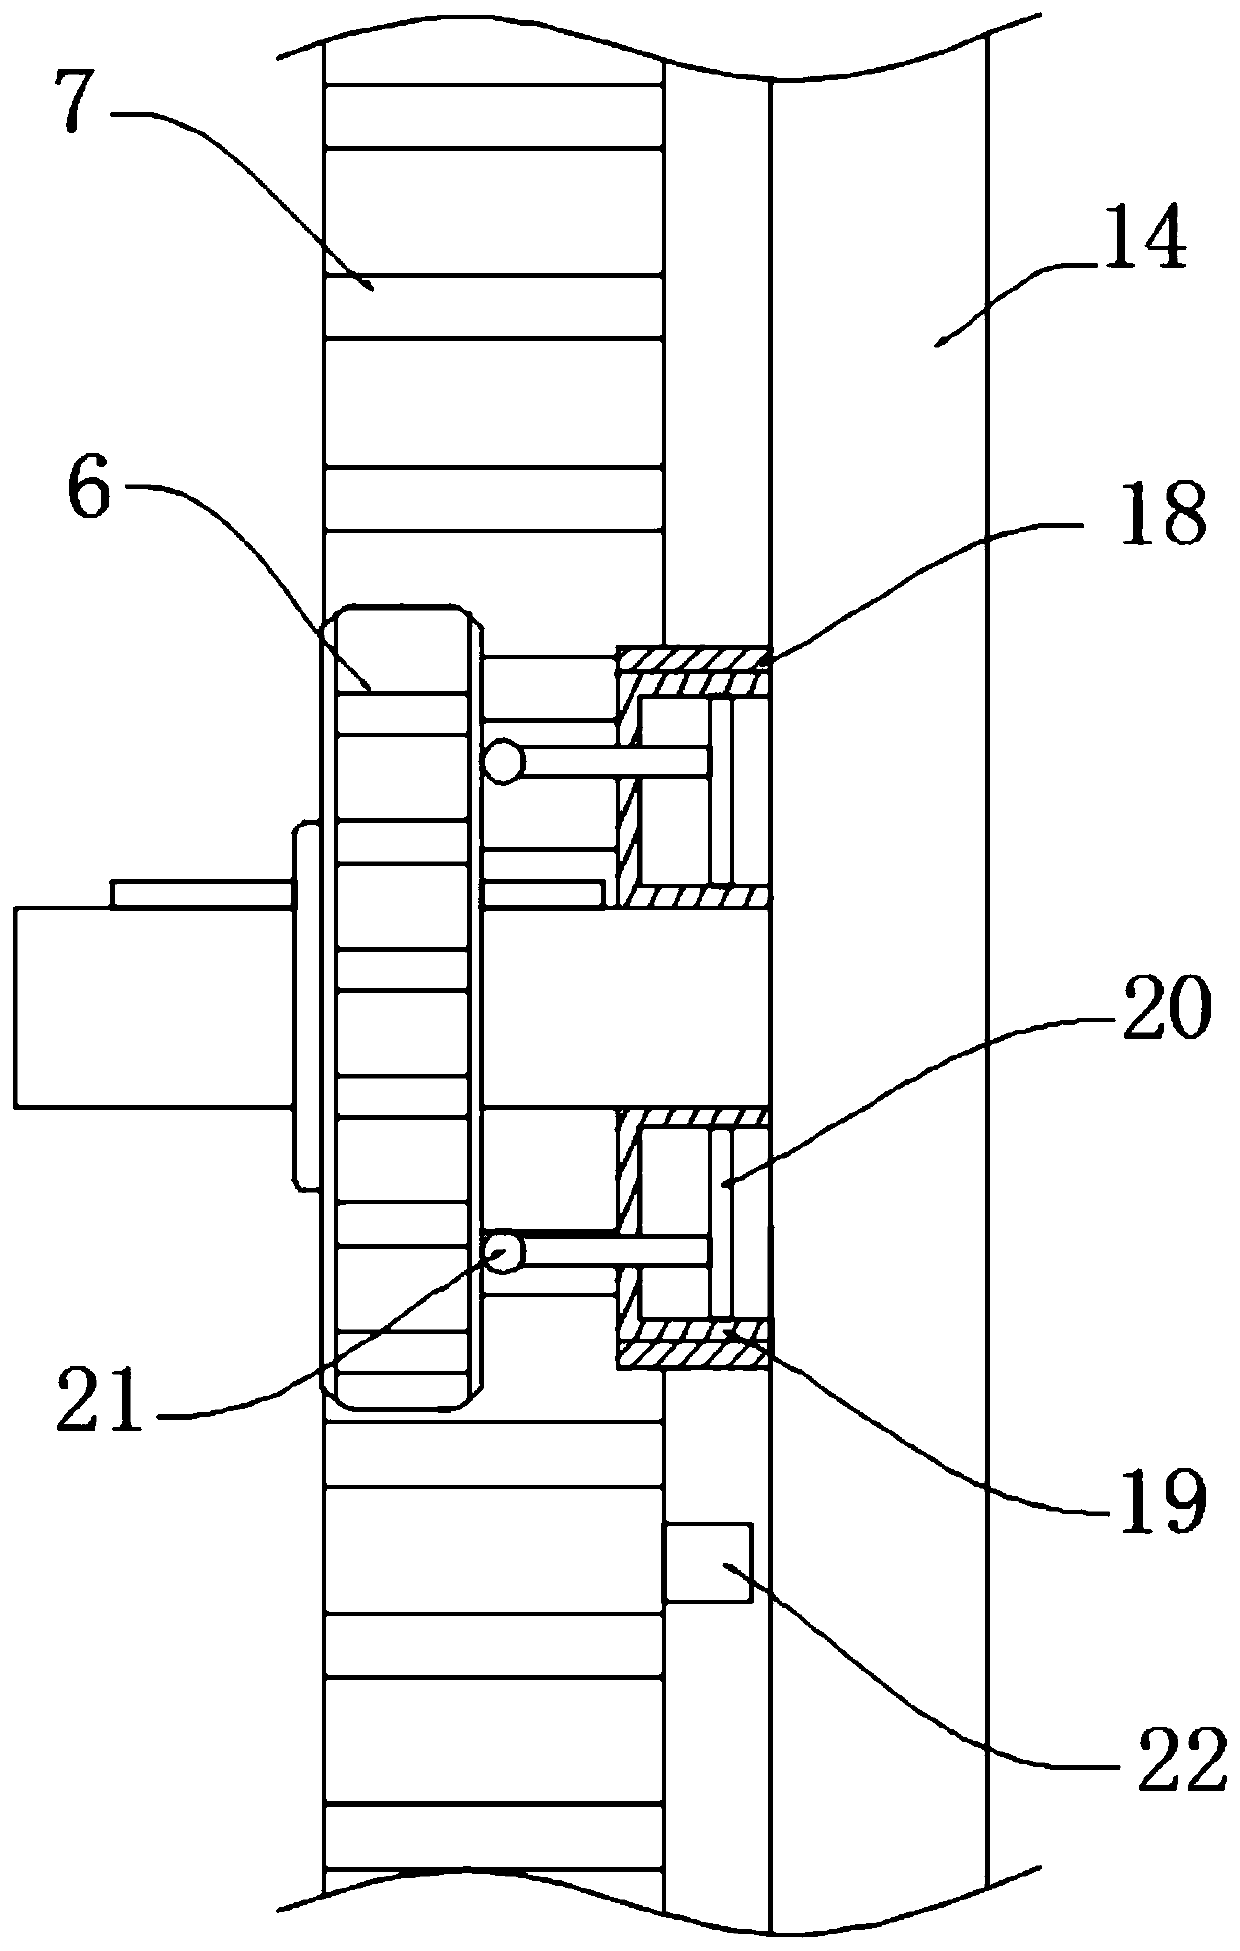 Overcurrent processor for electric power